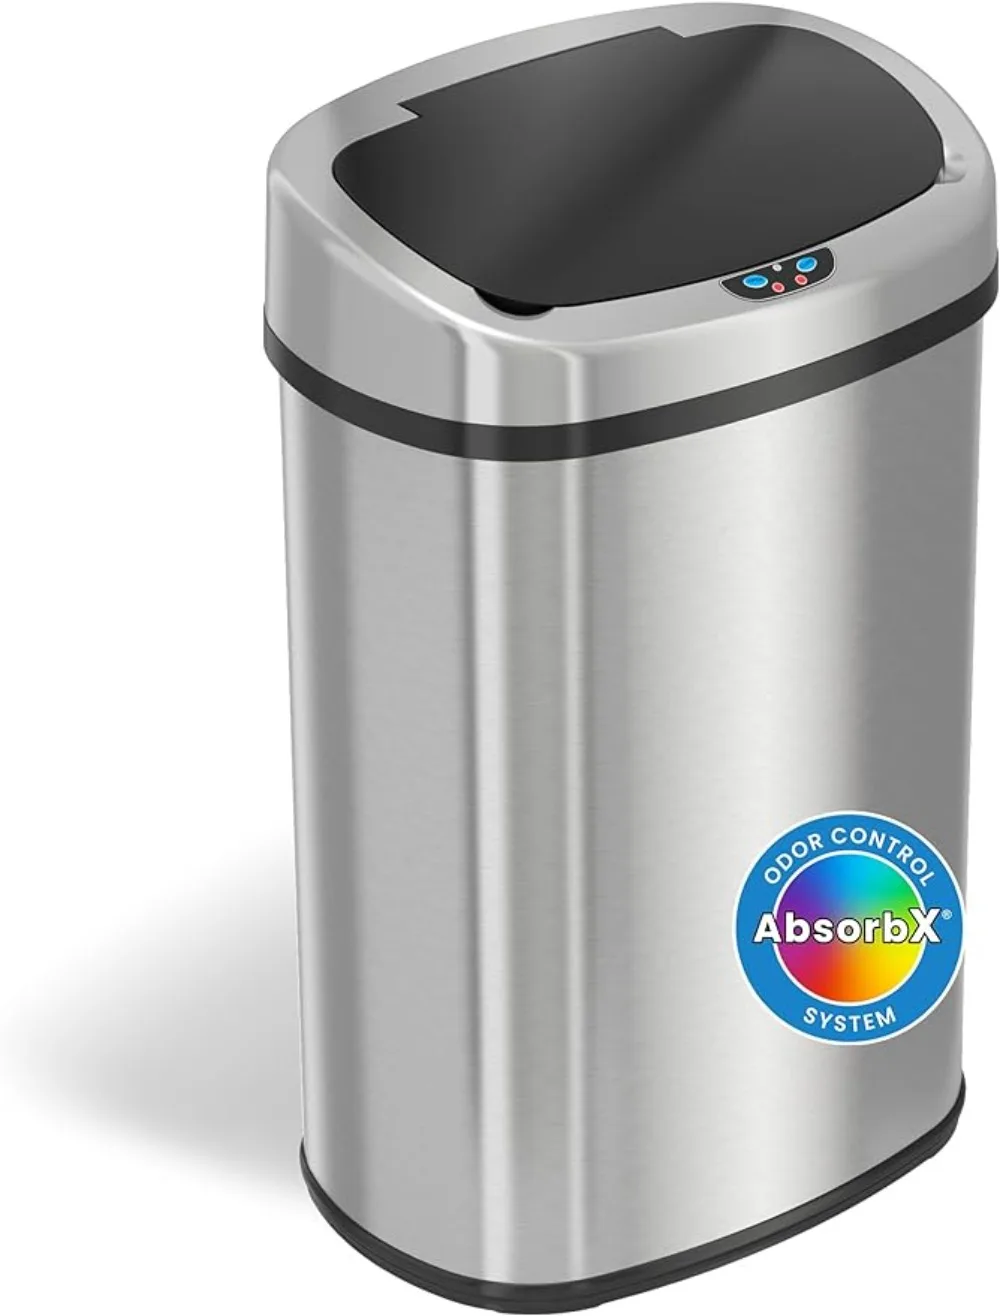 

iTouchless 13 Gallon SensorCan Touchless Trash Can with Odor Control System, Stainless Steel, Oval Shape Kitchen Bin